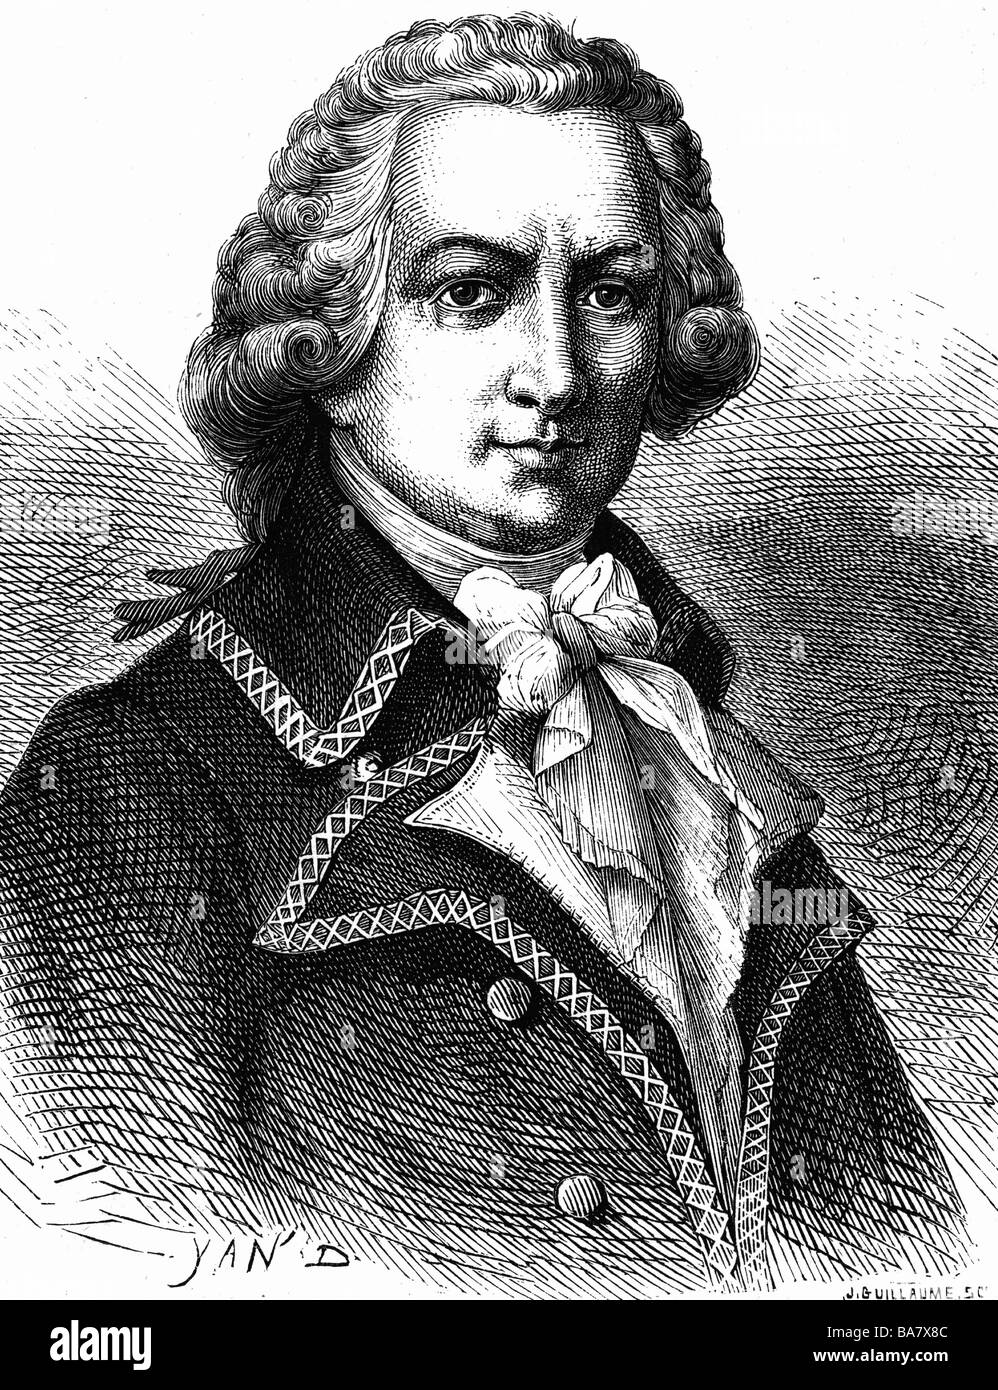 Bougainville, Louis Antoine de, 11.11.1729 - 31.8.1811, French discoverer and admiral, portrait, wood engraving by Guillaume, 19th century, after contemporary image, Stock Photo